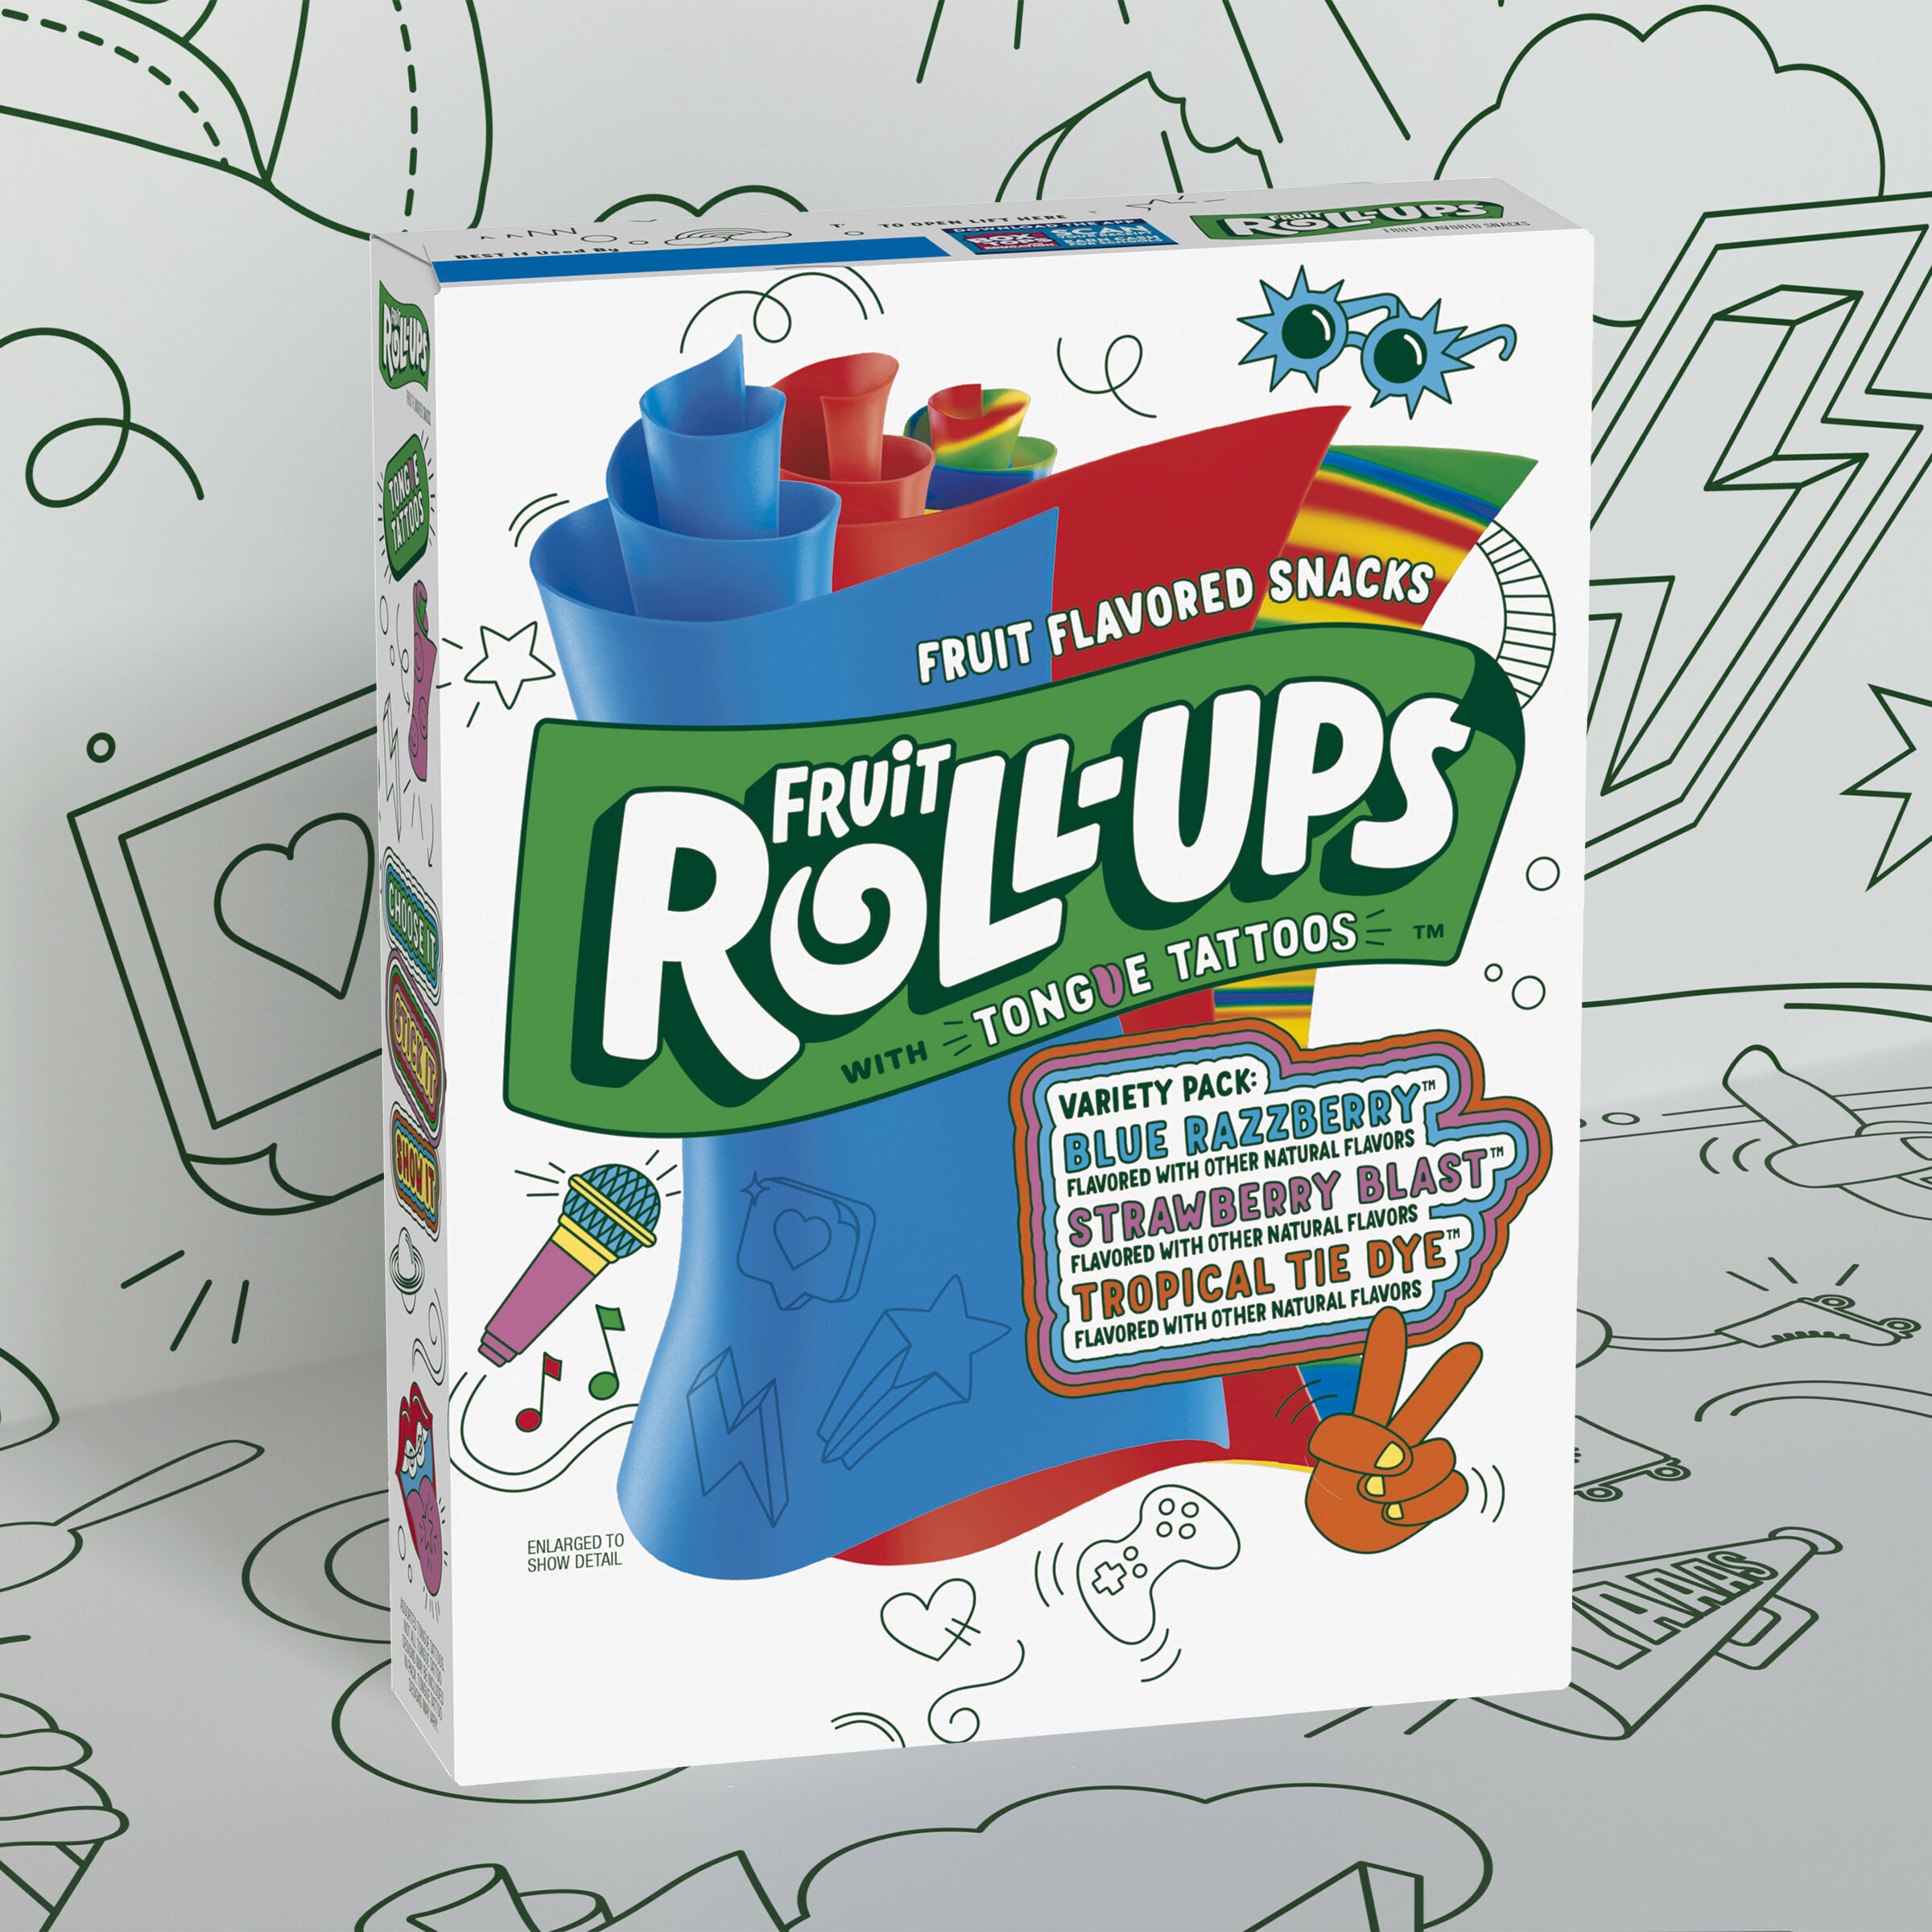 Fruit Roll-Ups Fruit Flavored Snacks, Variety Pack, Pouches, 10 ct - image 4 of 10